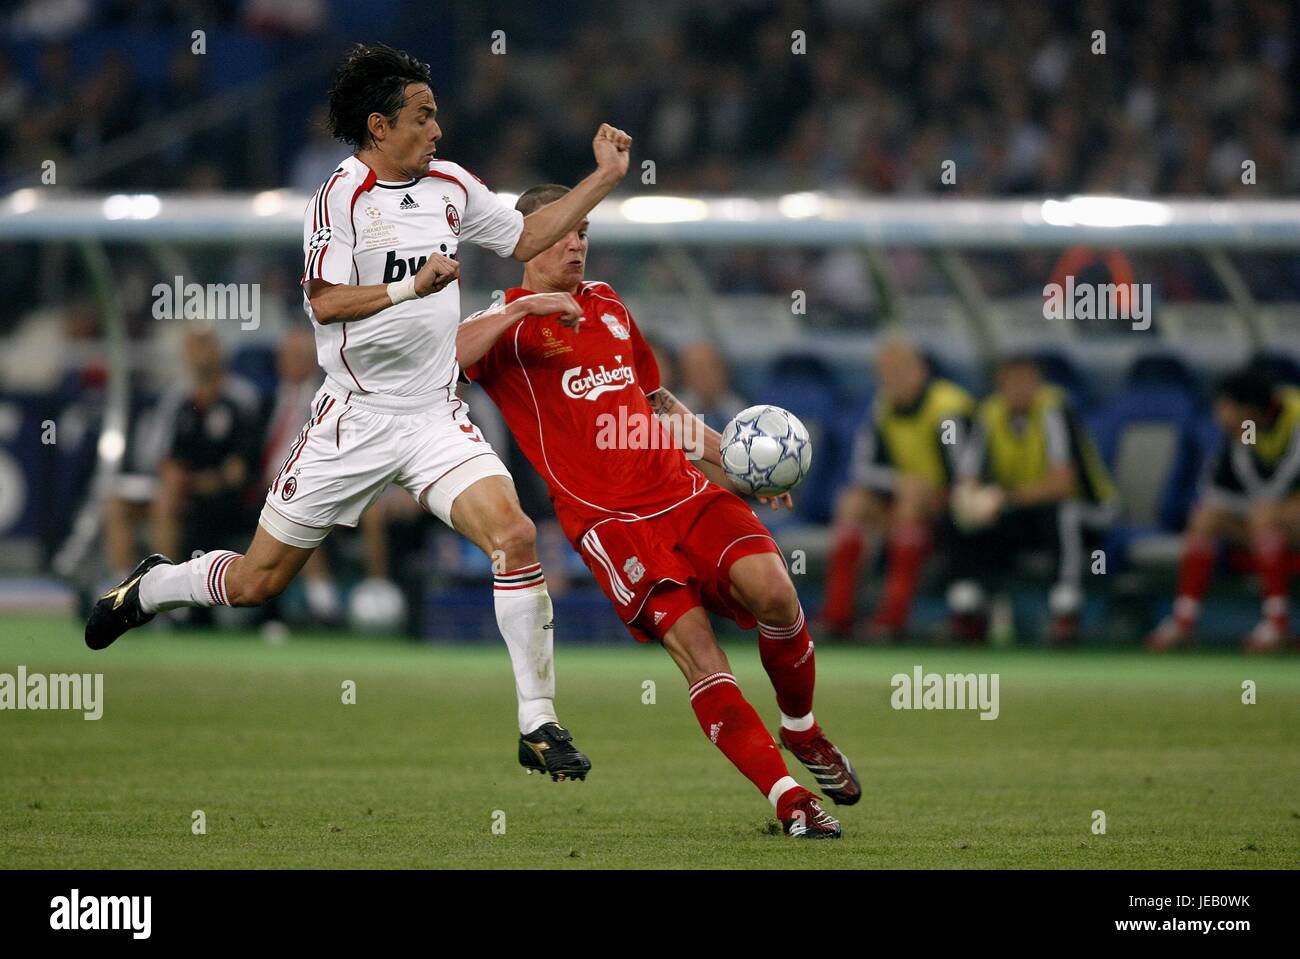 DANIEL AGGER & FILIPPO INZAGHI AC MILAN V LIVERPOOL OLYMPIC STADIUM ATHENS GREECE 23 May 2007 Stock Photo